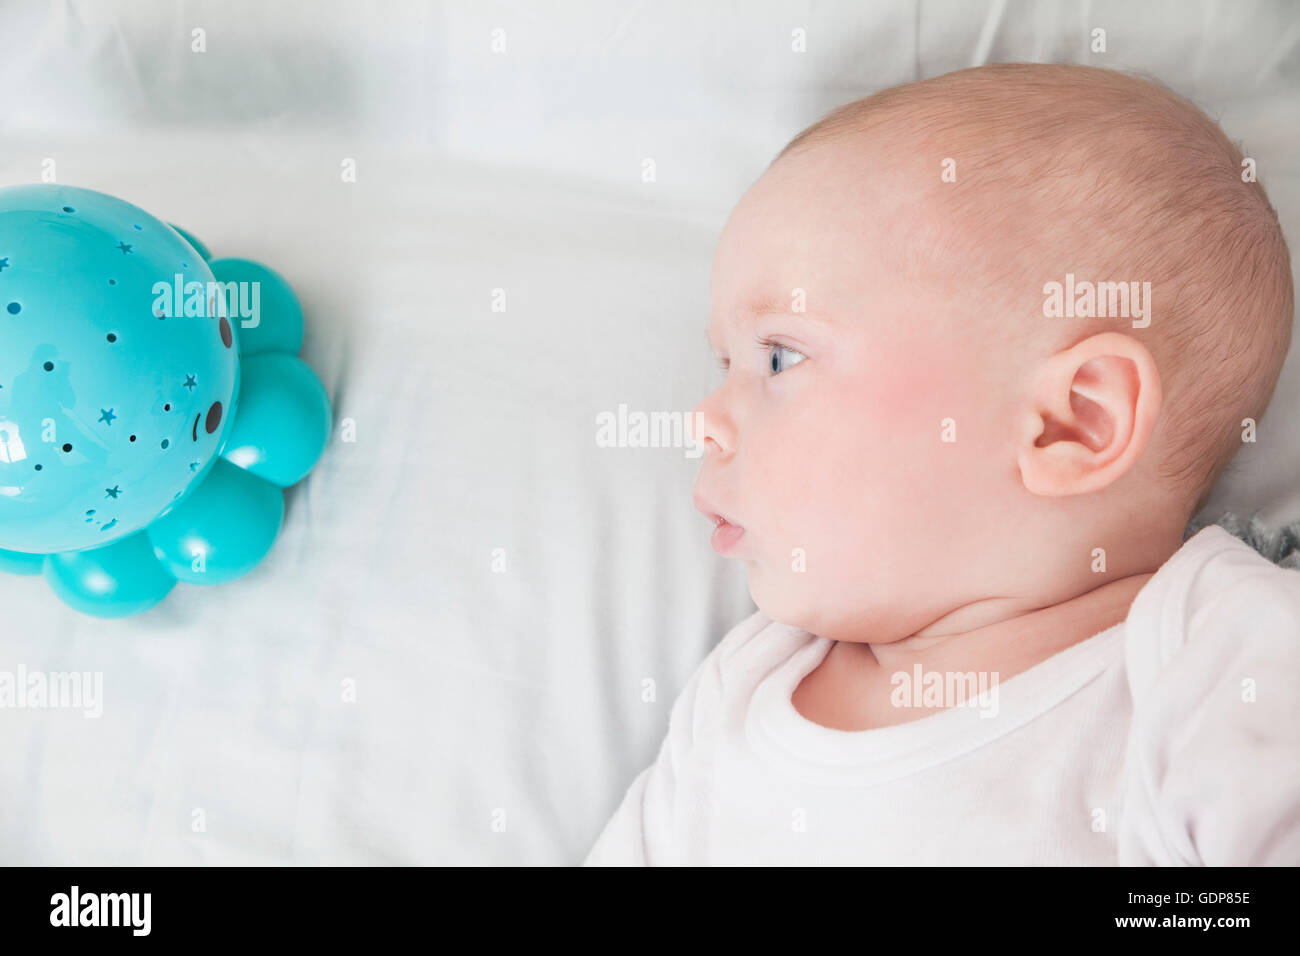 Baby boy staring at blue baby toy, overhead view Stock Photo